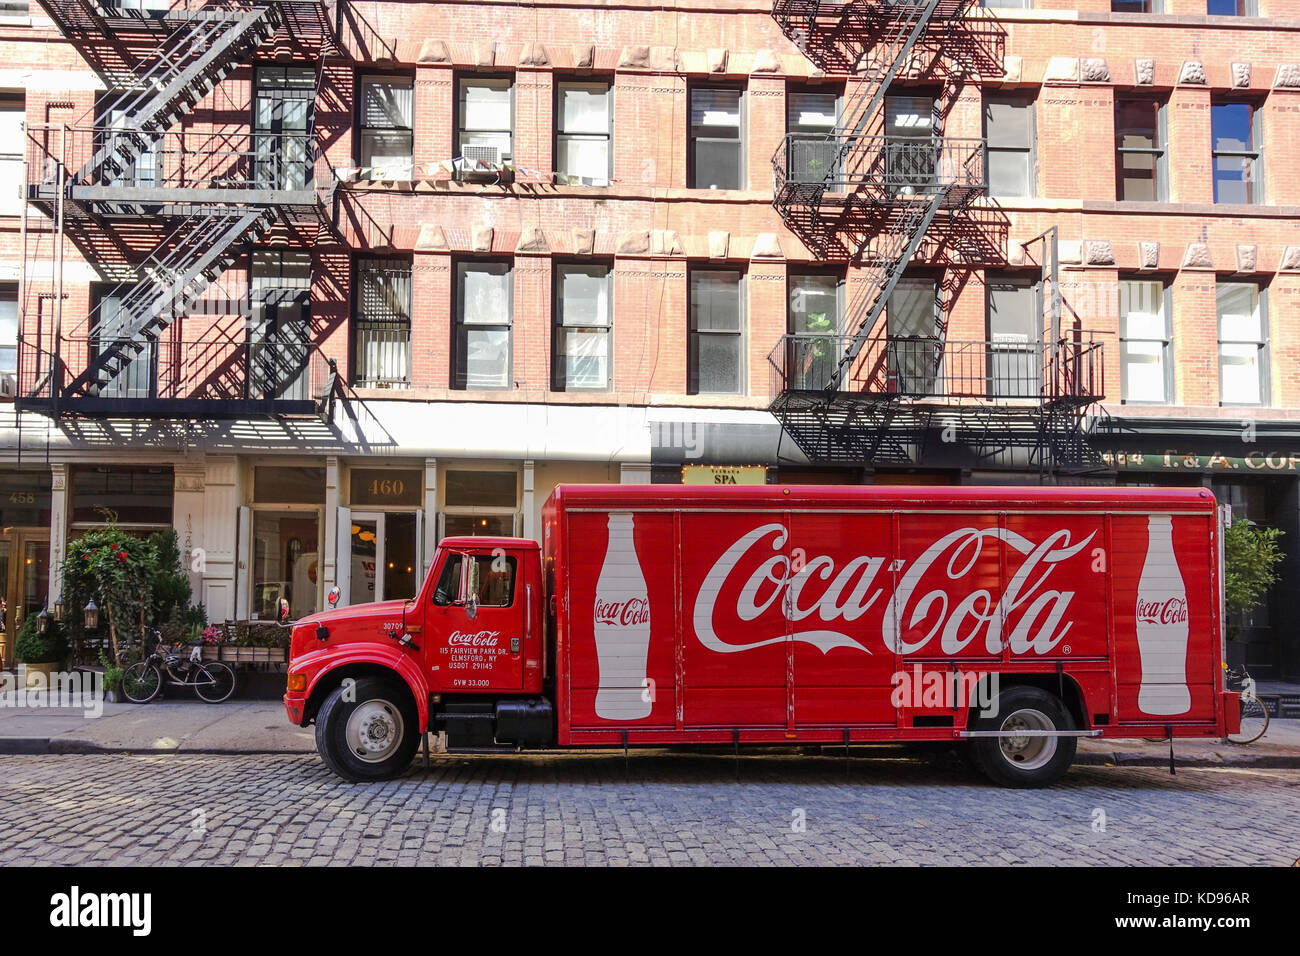 American Coca Cola delivery truck in front of Typical New york brick building with fire escapes, Manhattan, United states. Stock Photo